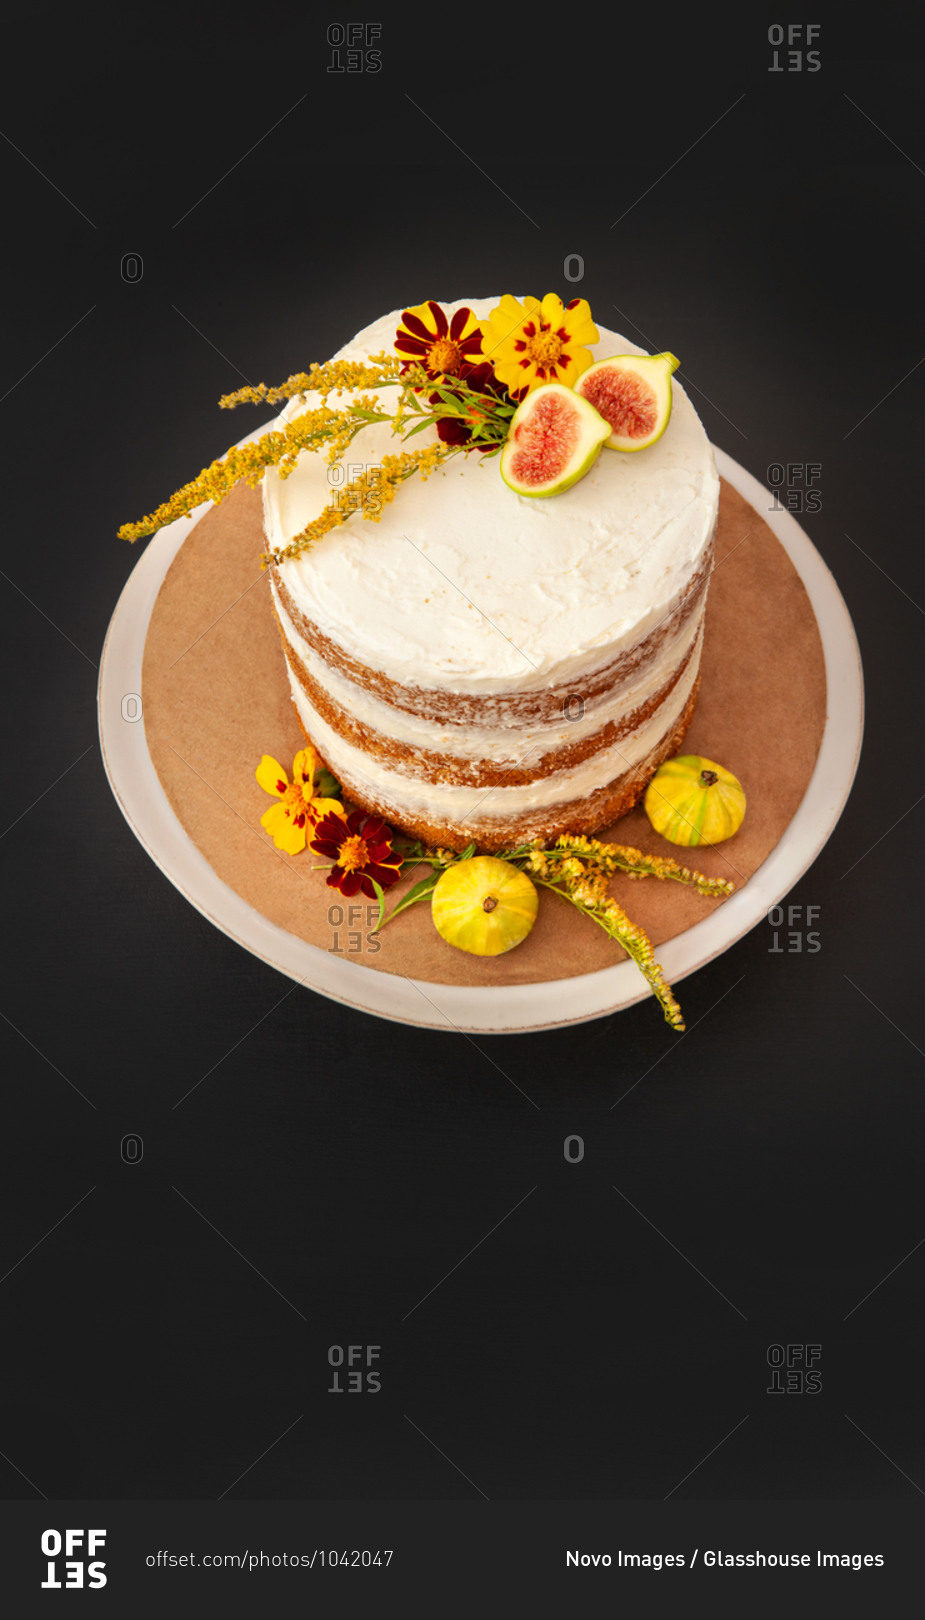 High Angle View of Vanilla Layer Cake Decorated with Edible Fresh Flowers and Fruit